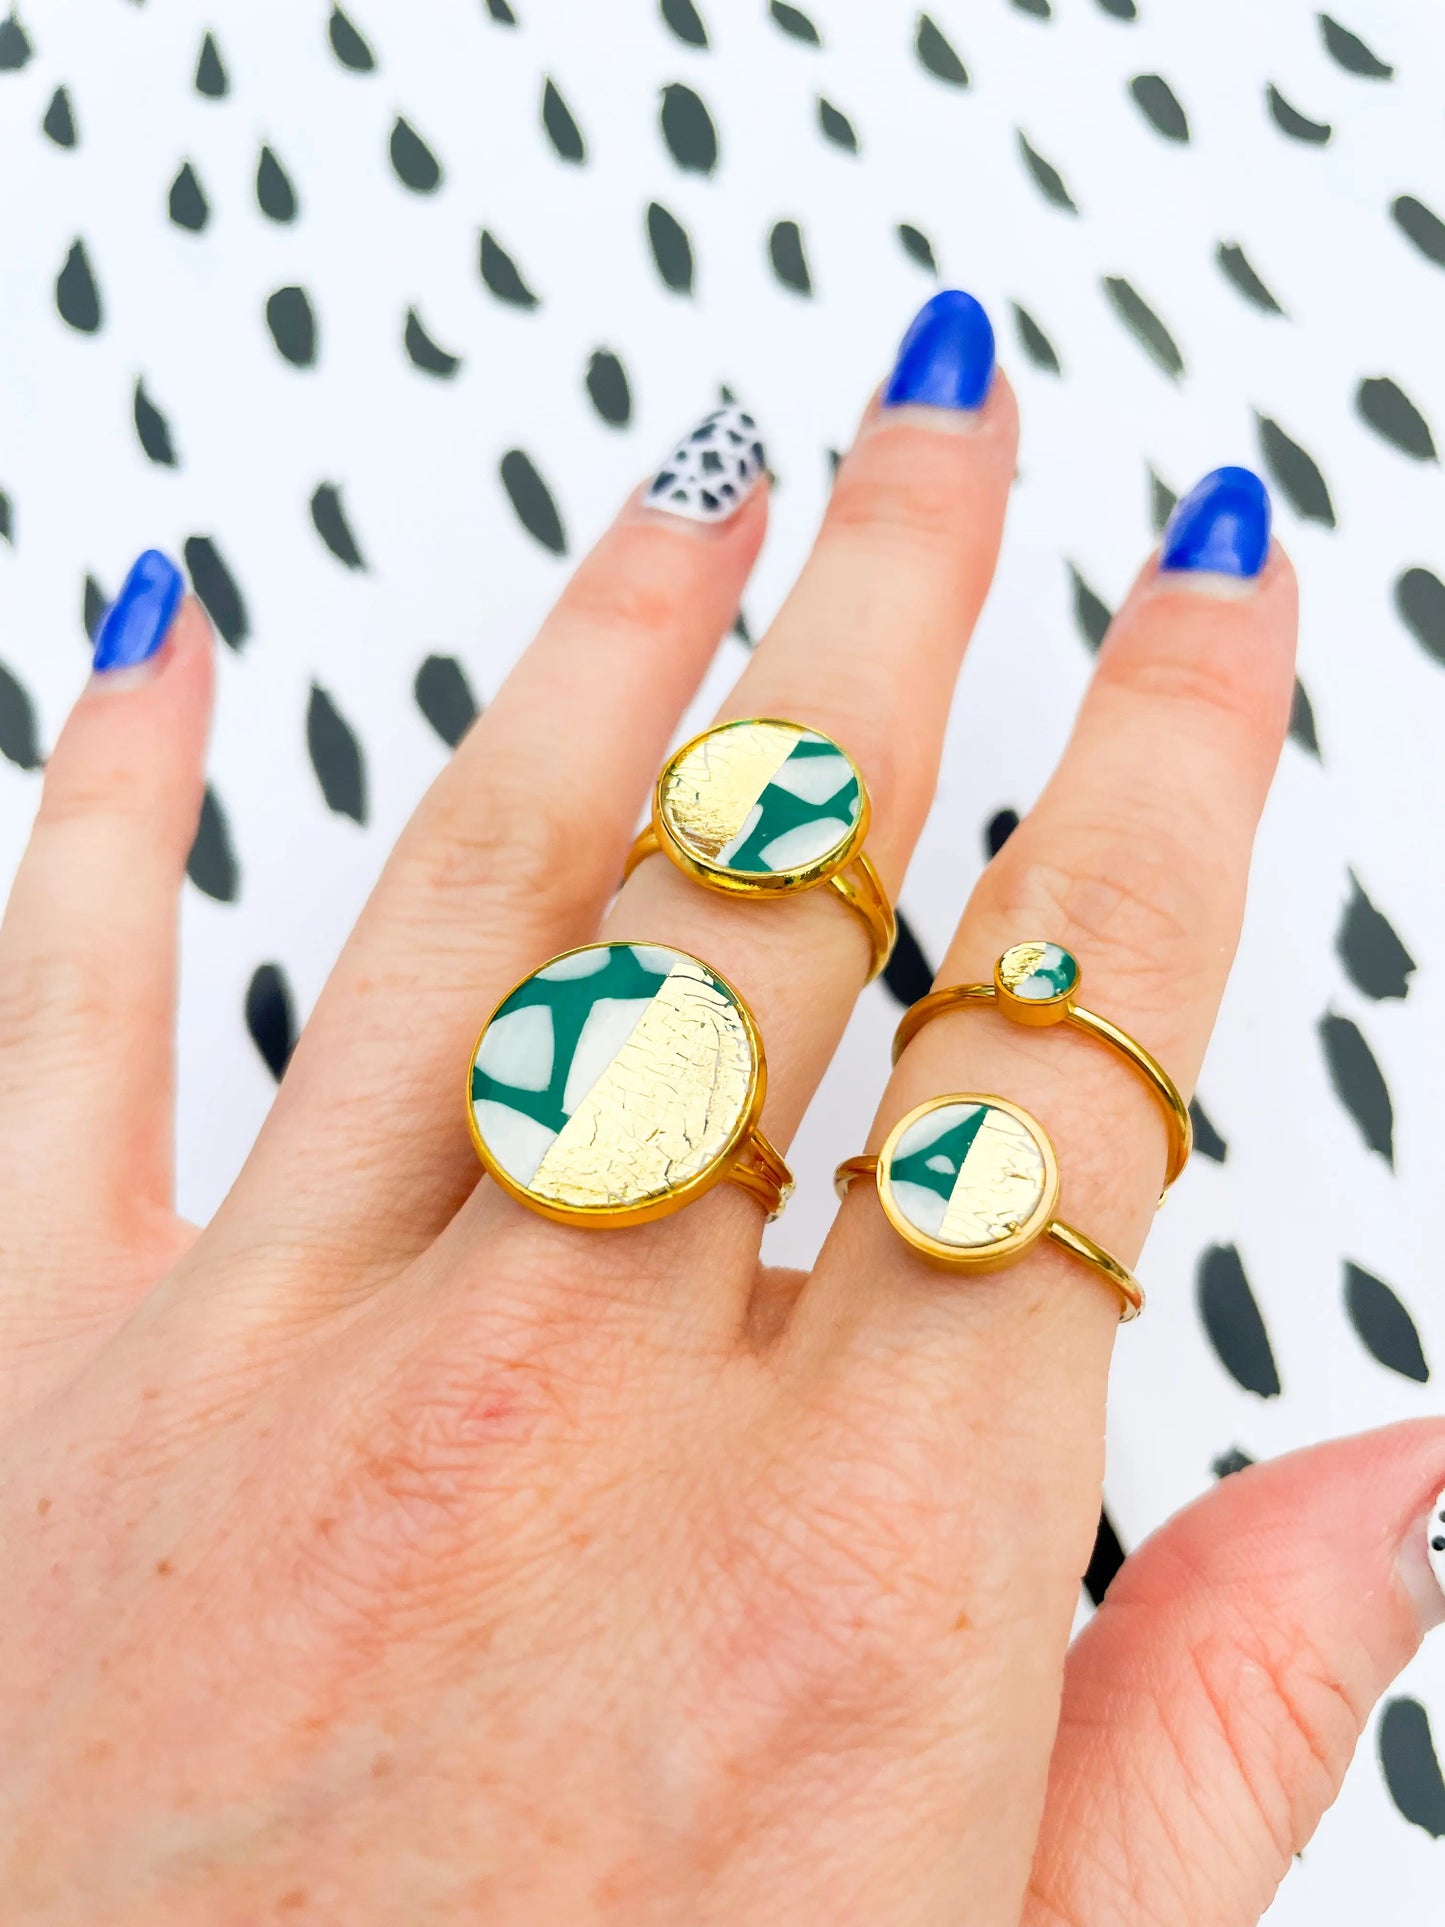 Teal and Gold Terrazzo Adjustable Ring from Sapphire Frills